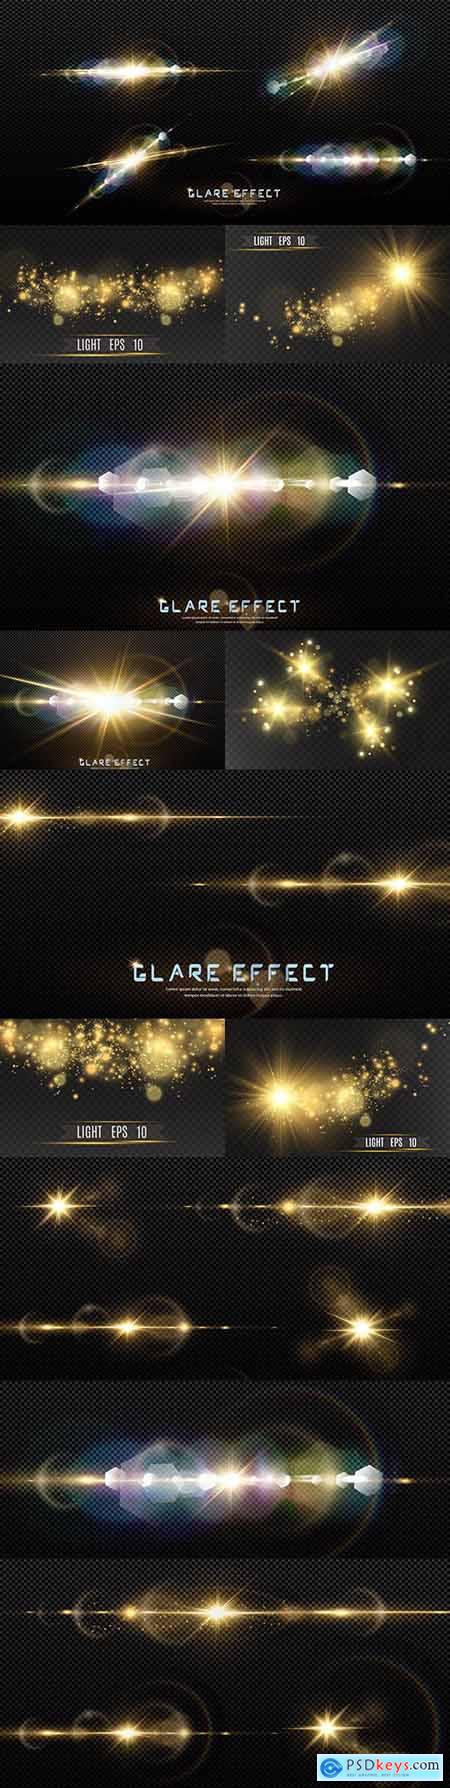 Sunlight and special lens of light effect highlights